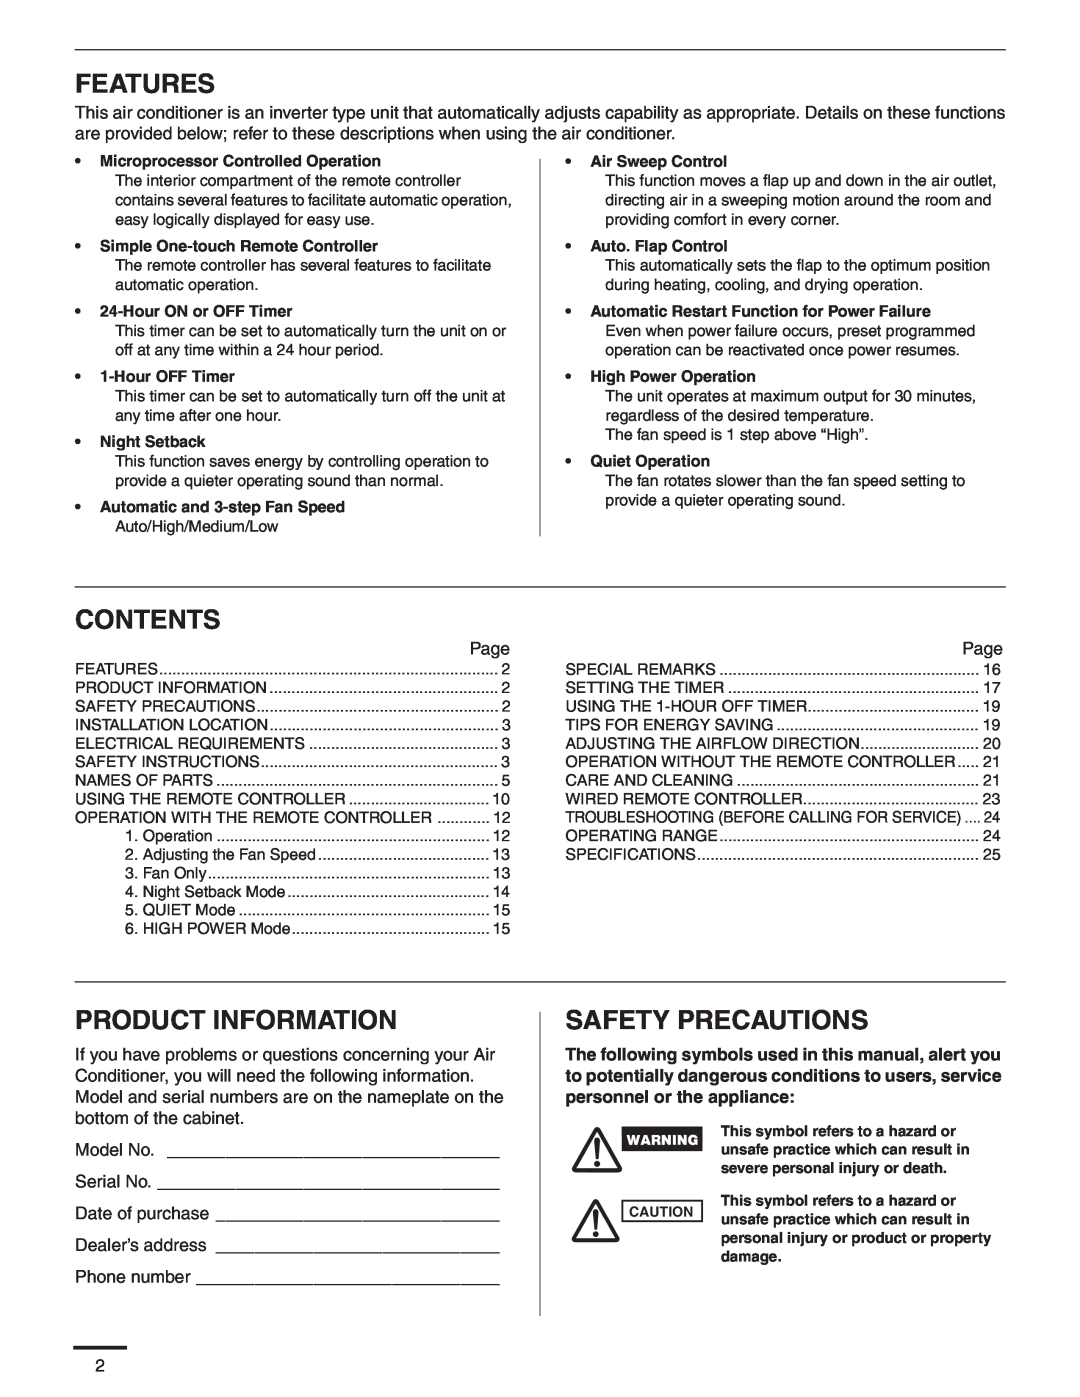 Panasonic CS-MKS24NKU Features, Contents, Product Information, Safety Precautions, Microprocessor Controlled Operation 